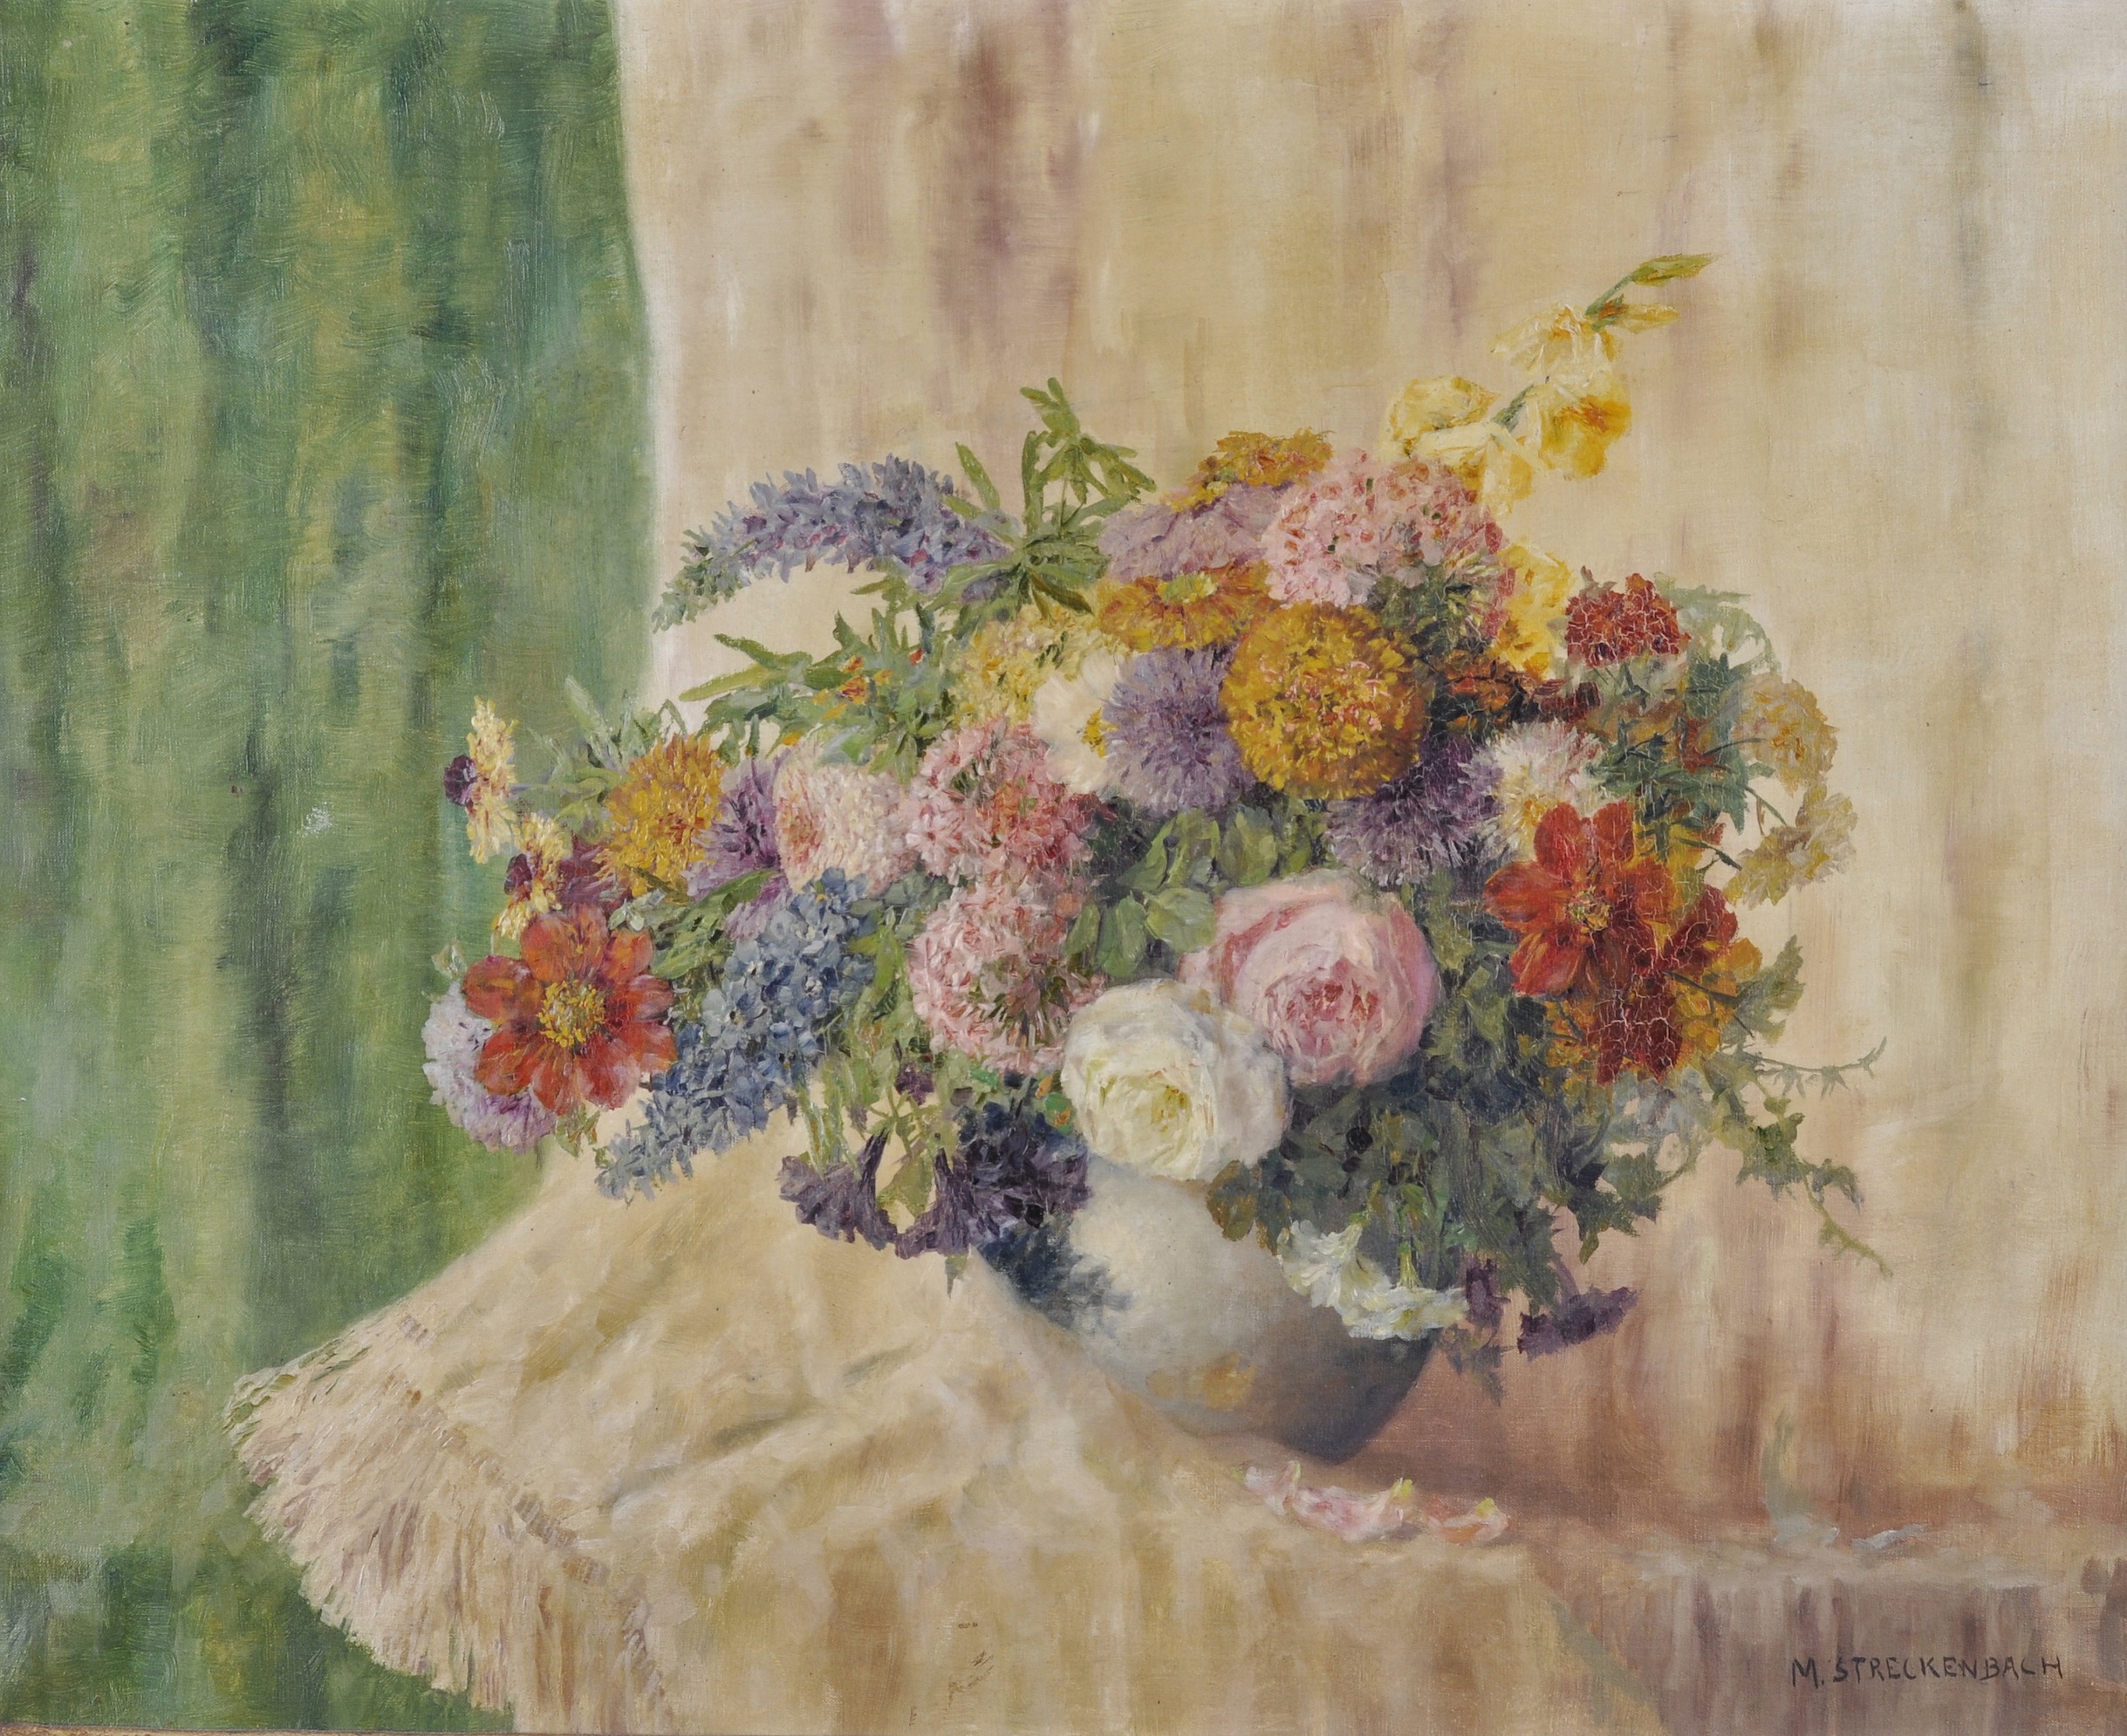 MAX THEODORE STRECKENBACH (German 1863-1936) A PAINTING, "Still Life with Bouquet of Flowers in